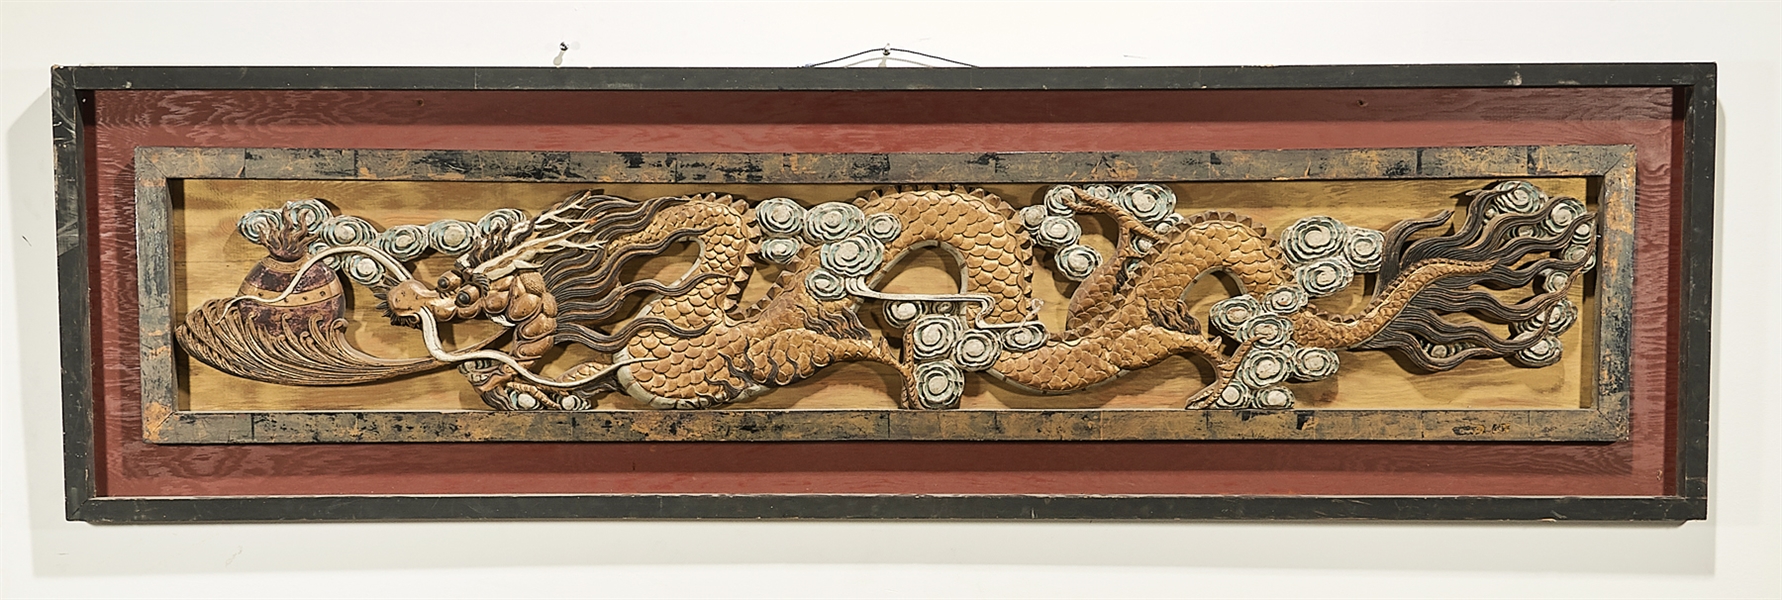 Chinese carved wood framed panel  2ae91c